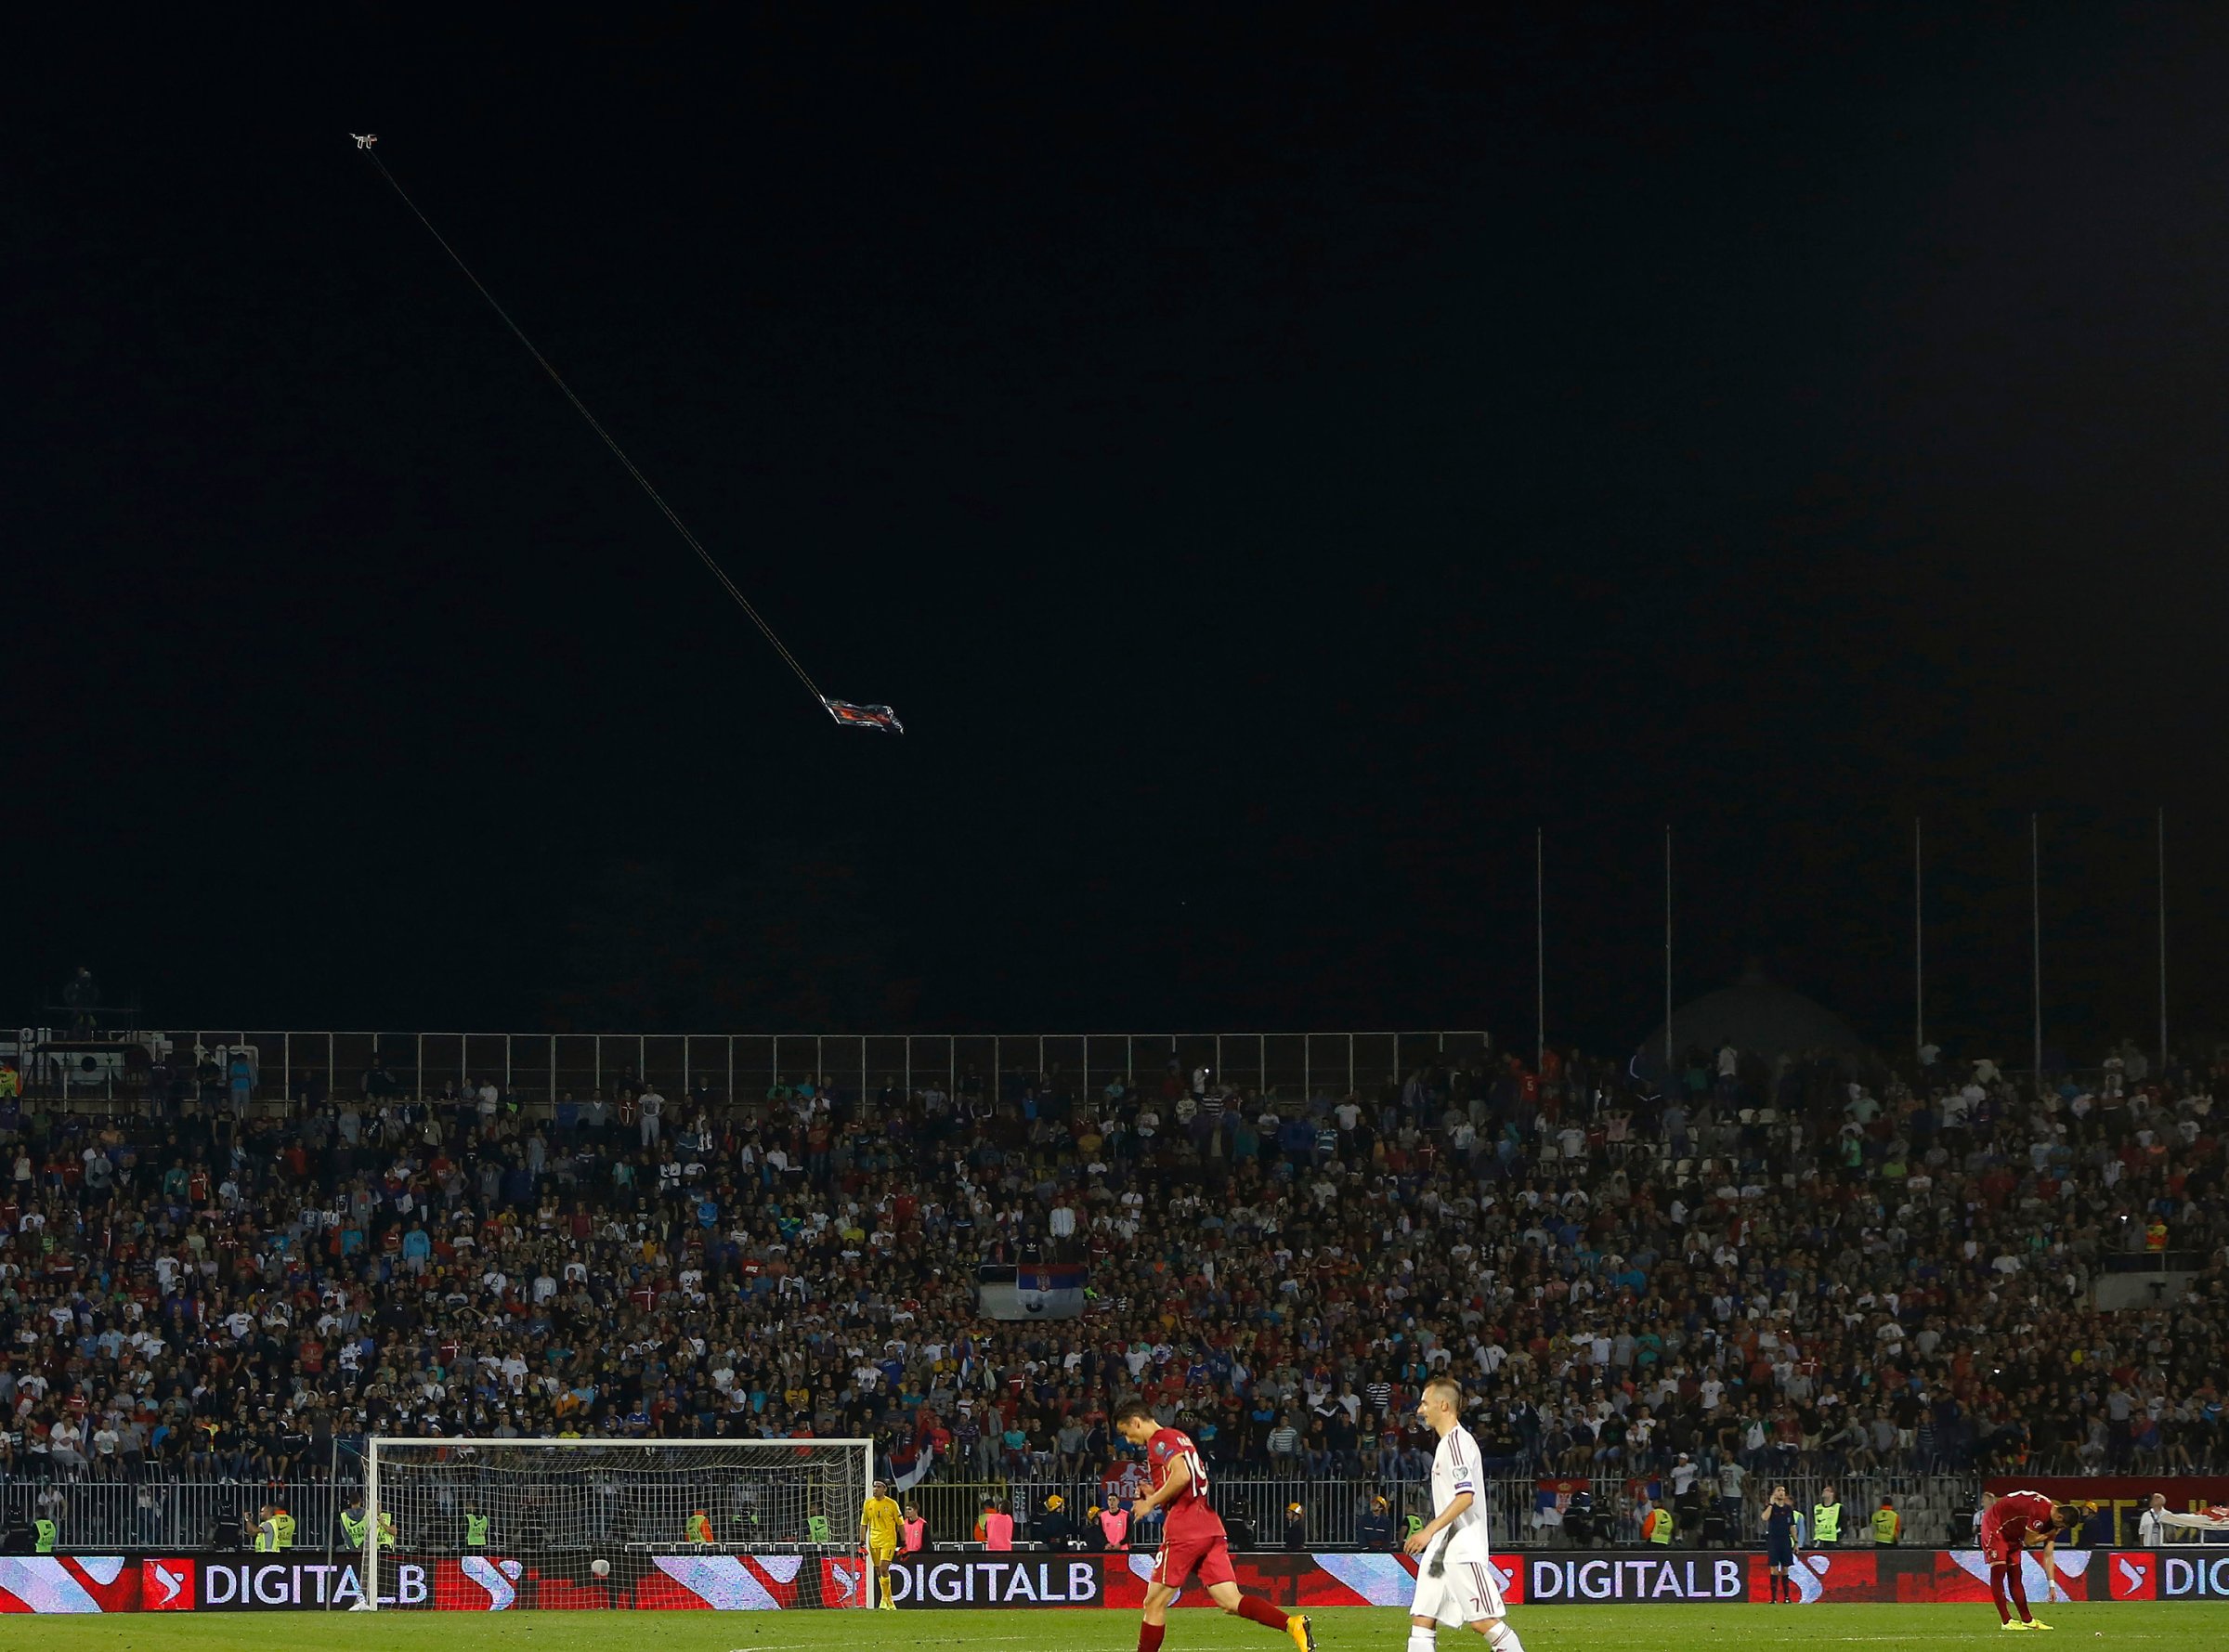 Mini drone carrying flag depicting so-called Greater Albania is flown over the pitch during their Euro 2016 Group I qualifying soccer match against Albania at the FK Partizan stadium in Belgrade